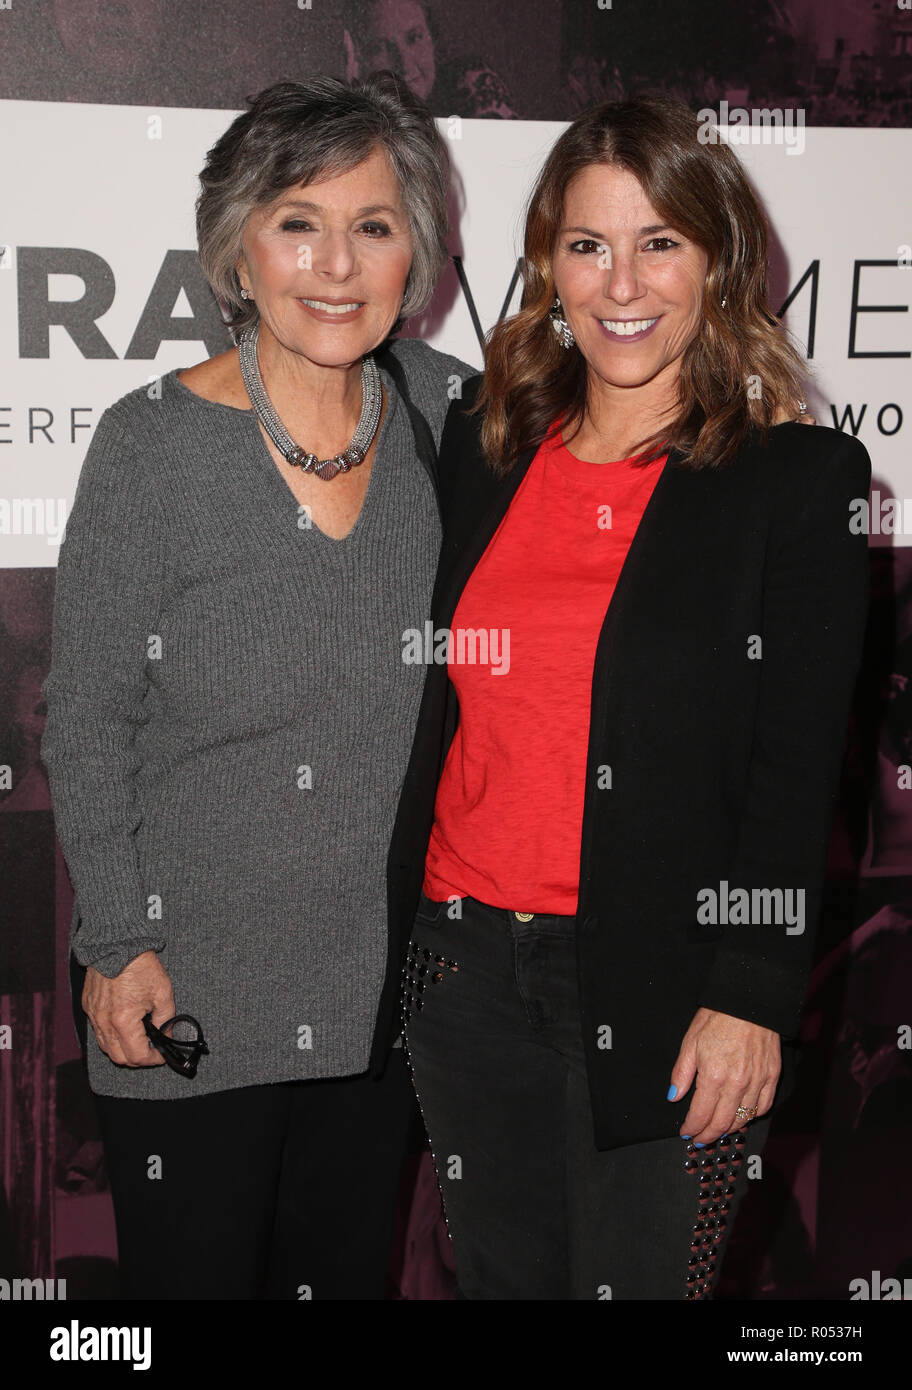 Los Angeles, Ca, USA. 1st Nov, 2018. Barbara Boxer and Nicole Boxer at TheWraps Power Womens Summit at the InterContinental Hotel in Los Angeles, California on November 1, 2018. Credit: Faye Sadou/Media Punch/Alamy Live News Stock Photo